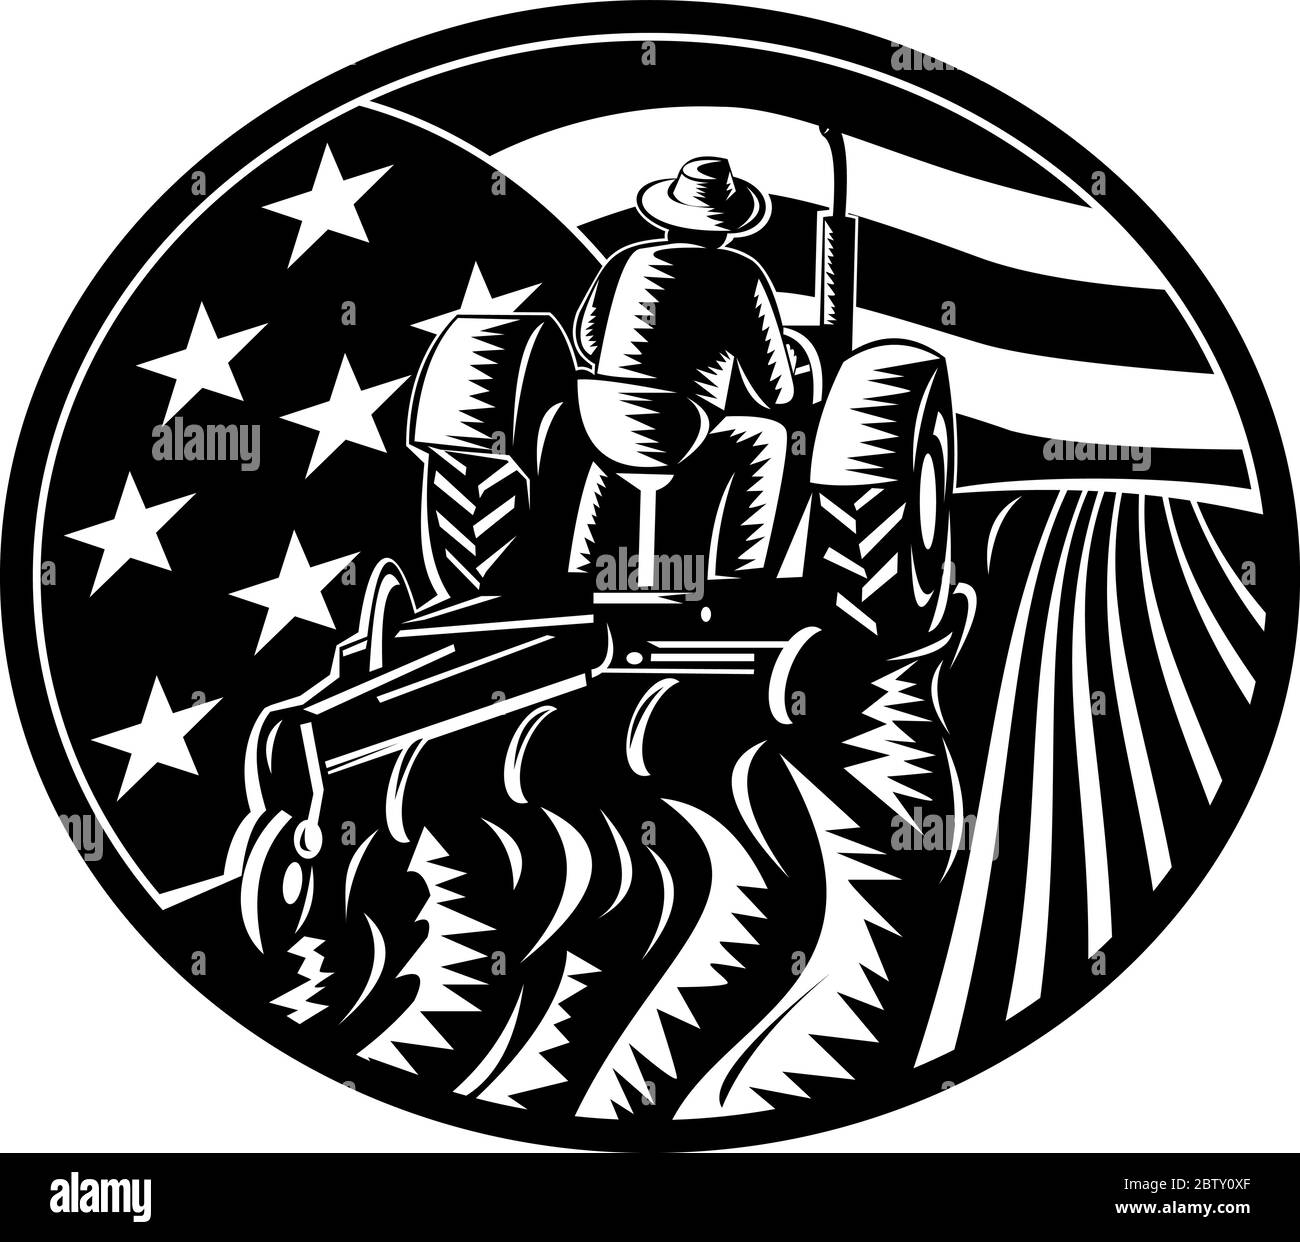 Retro illustration of an American organic farmer worker driving a vintage tractor plowing farm field with USA stars and stripes flag inside oval done Stock Vector